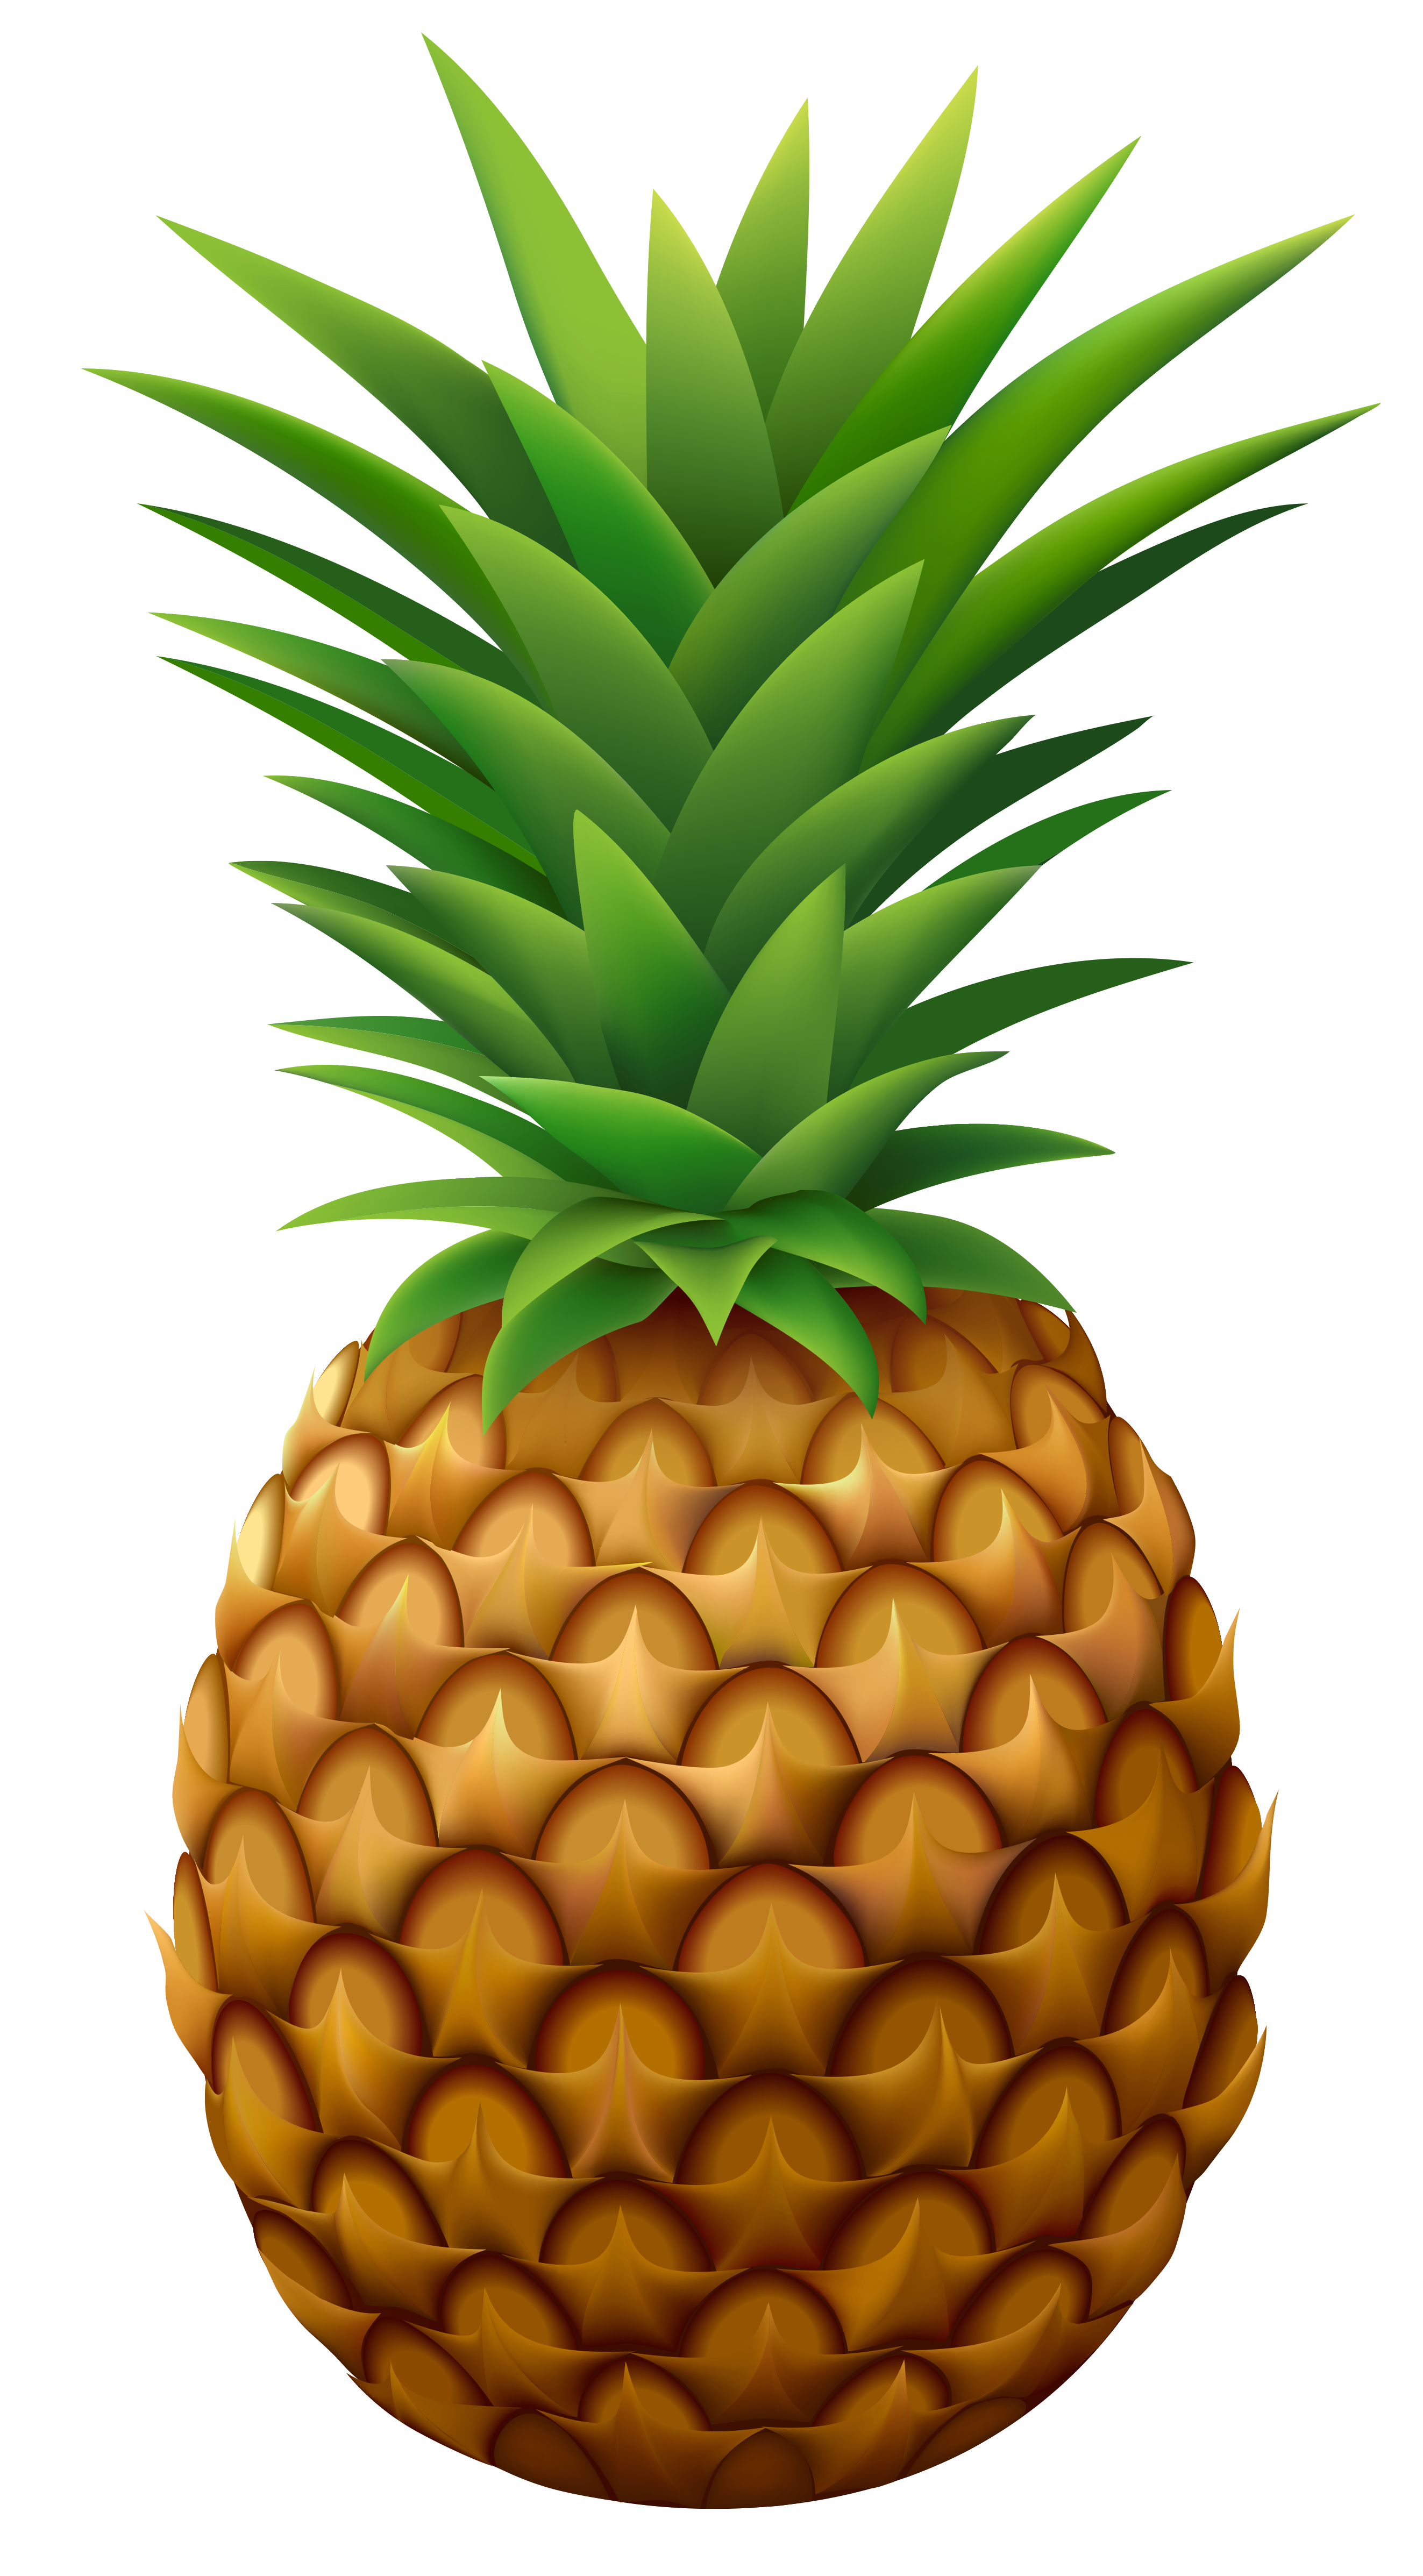 Png vector image gallery. Palm clipart pineapple